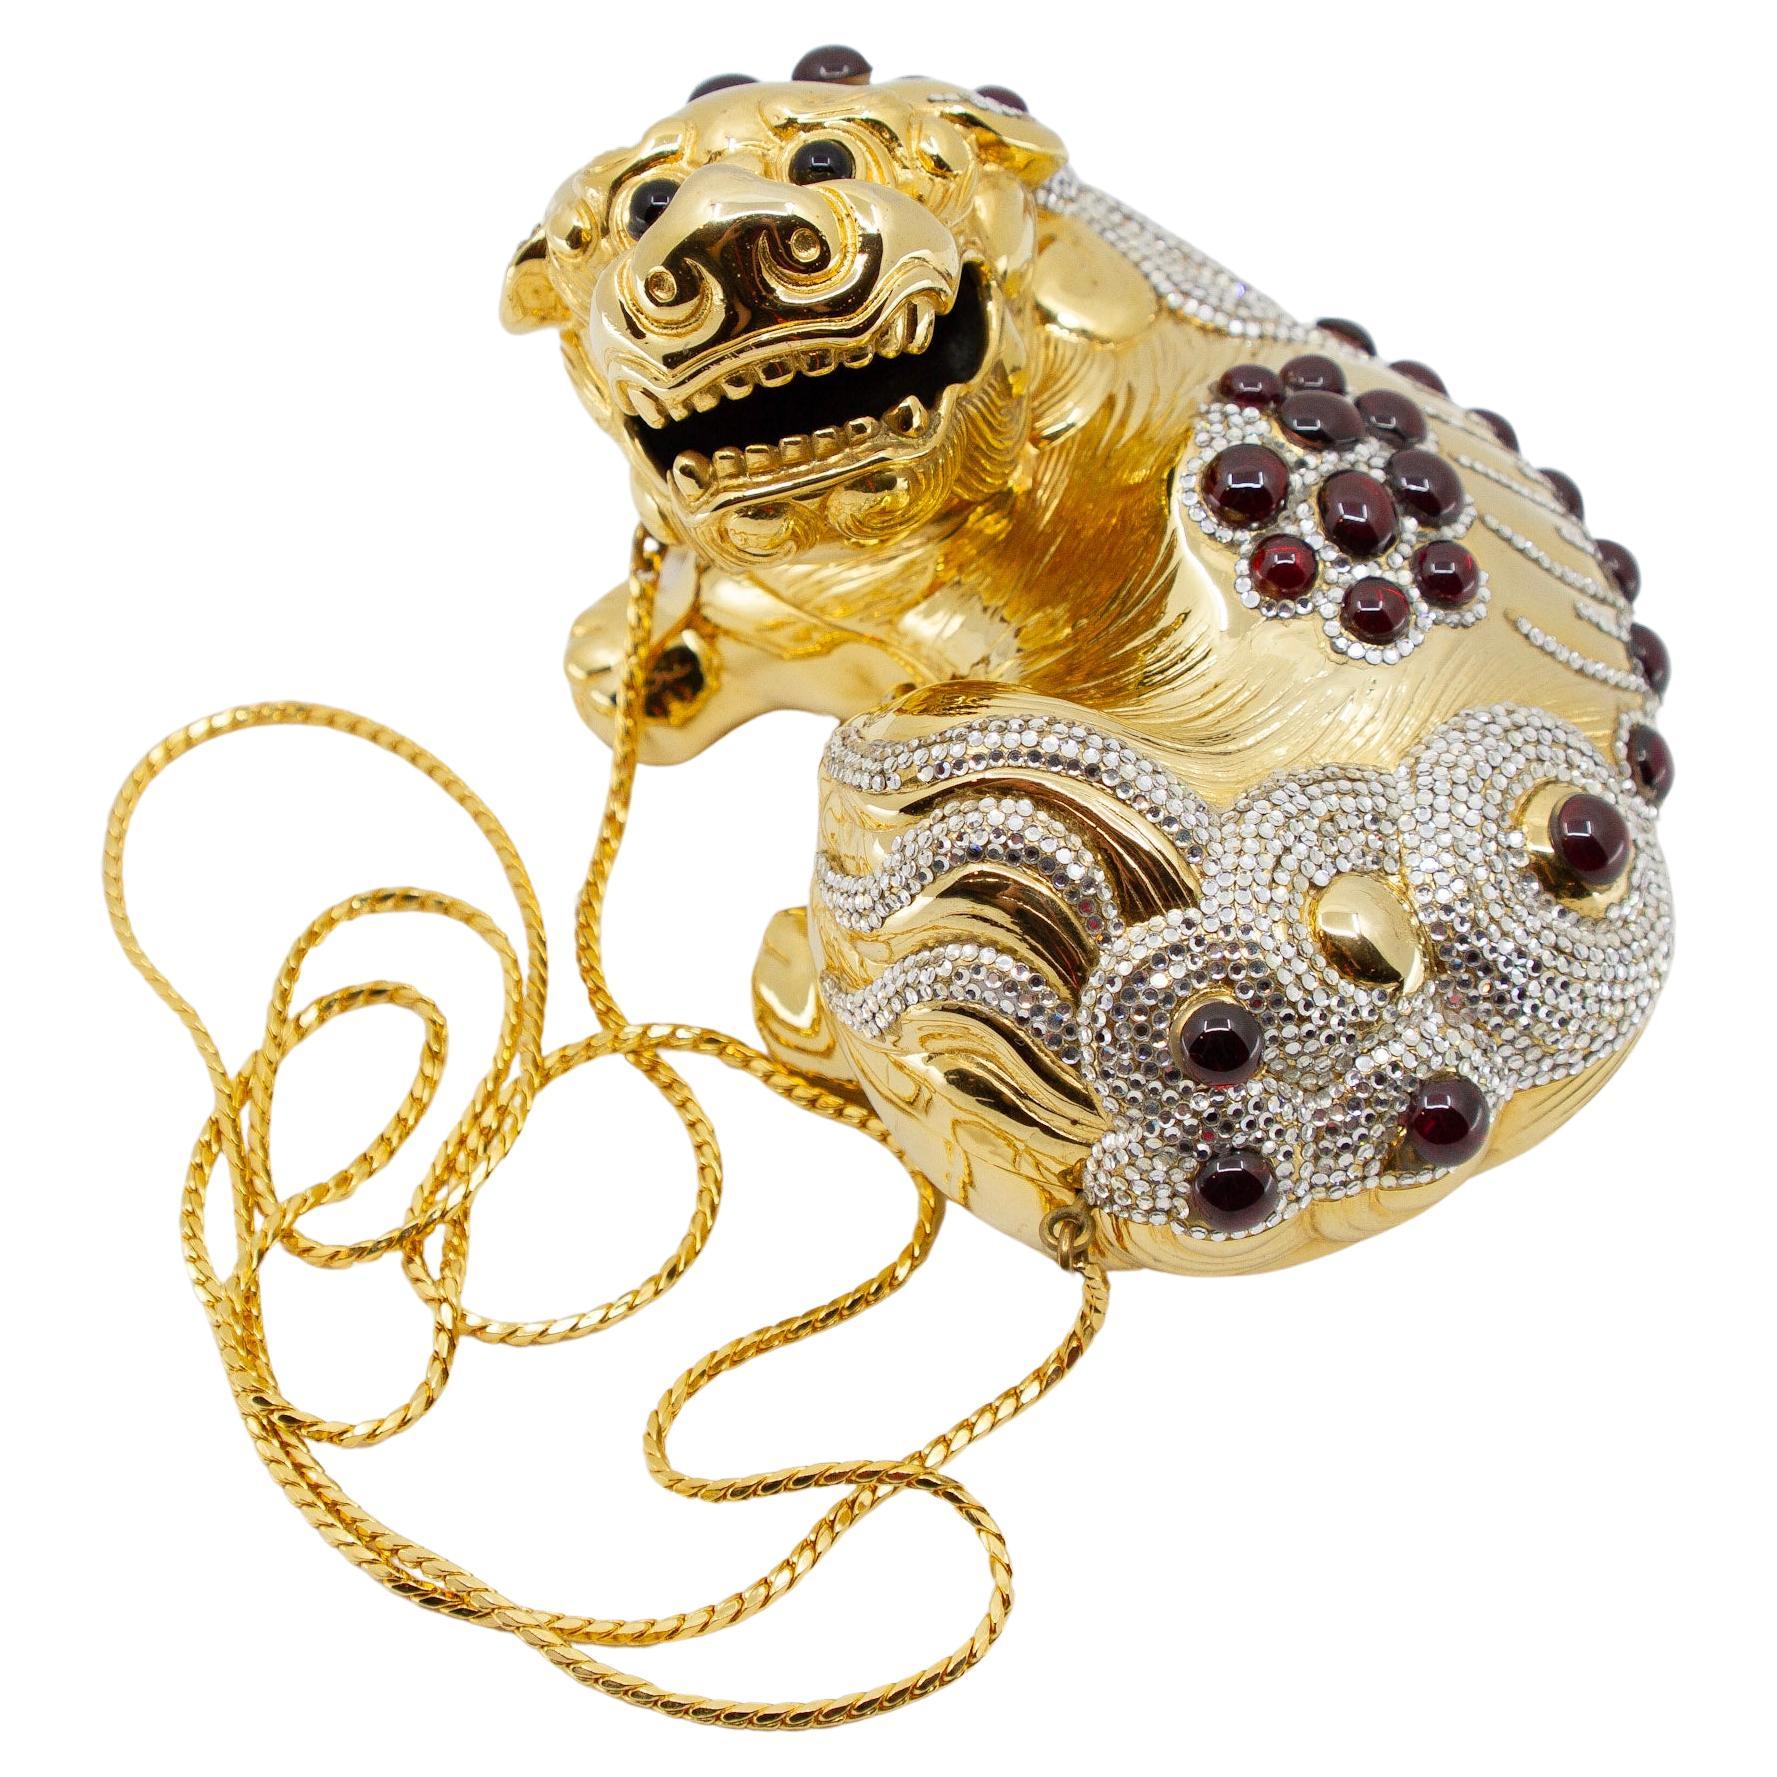 Judith Leiber Chinese Foo Dog Dragon Minaudiere Evening Bag For Sale